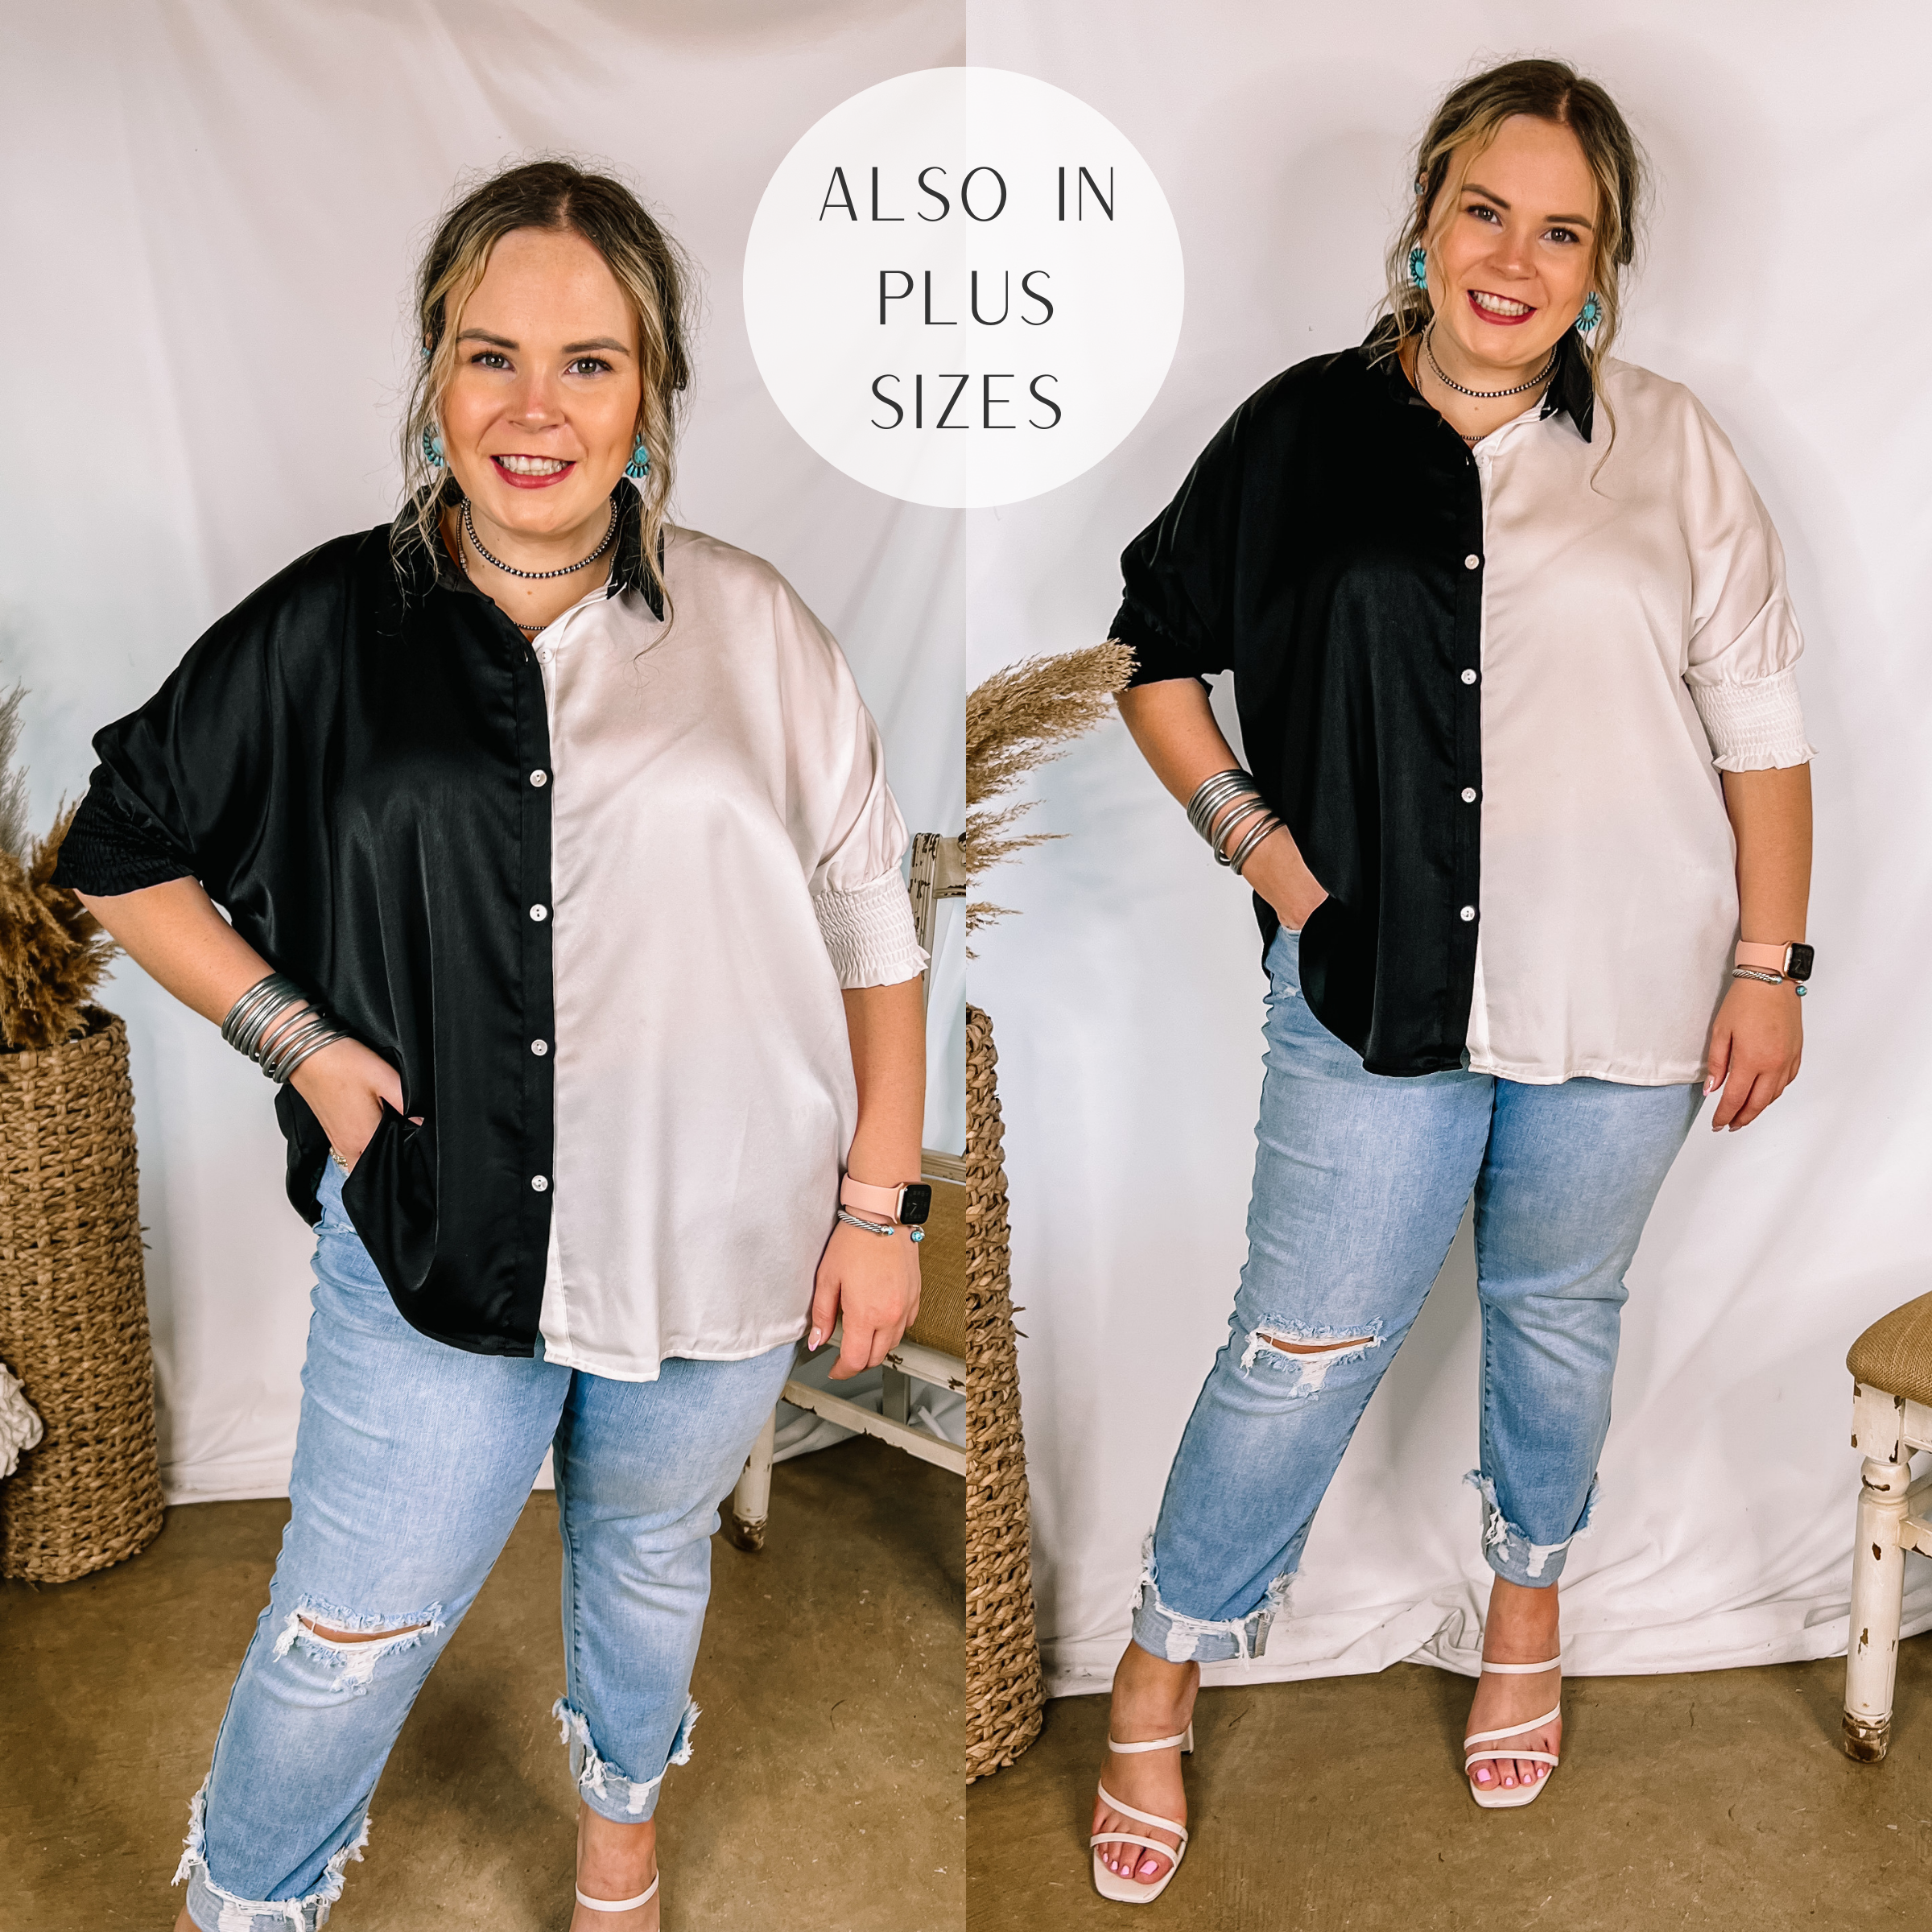 Model is wearing a black and white color block top that has a button up front and collared neckline. Model has it paired with distressed boyfriend jeans, white strappy heels, and sterling silver jewelry.